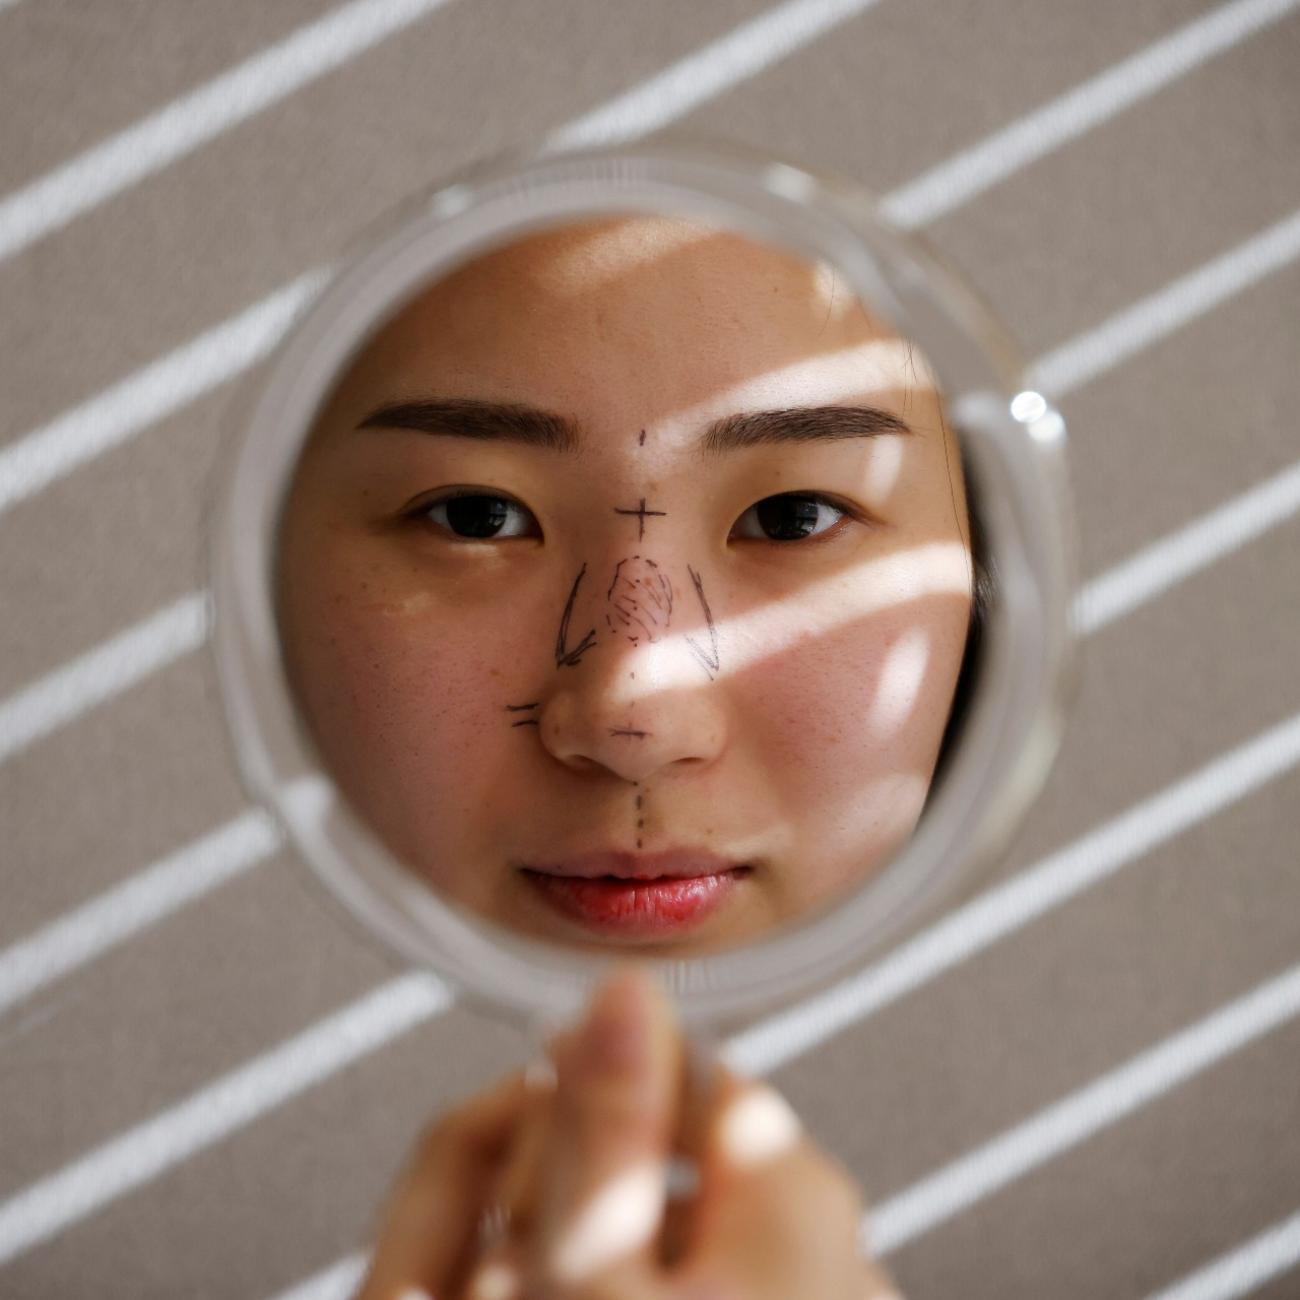 Ryu Han-na poses for photographs before undergoing nose plastic surgery at WooAhIn Plastic Surgery Clinic in Seoul, South Korea, December 17, 2020.